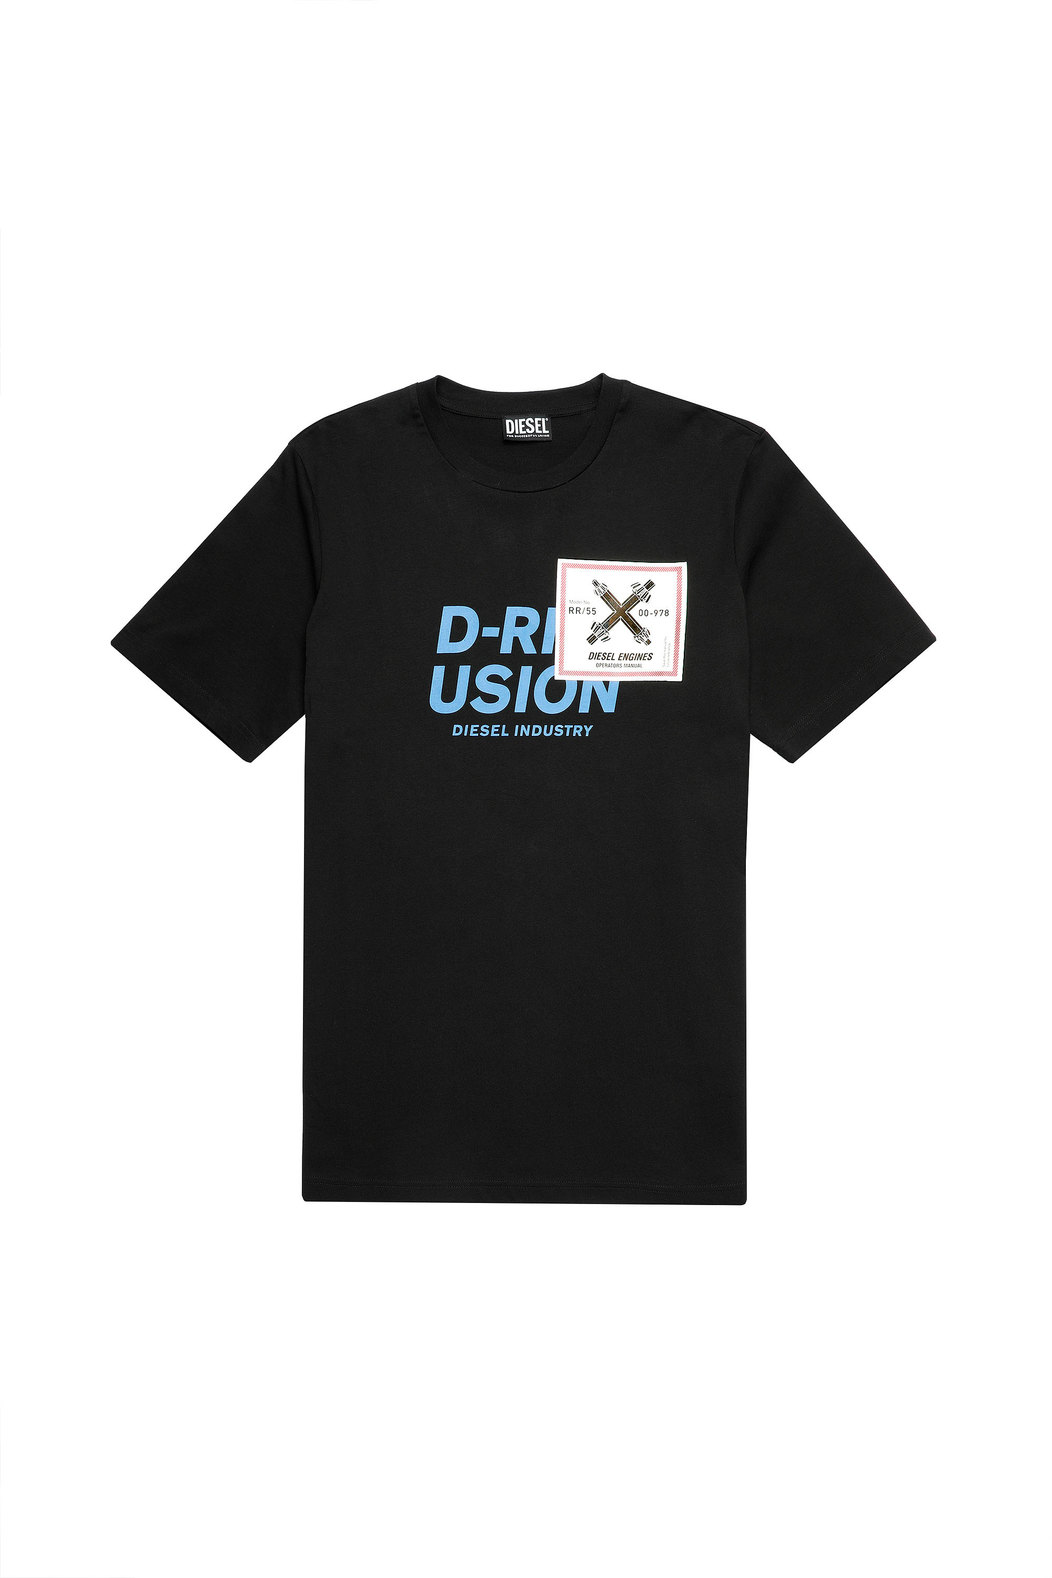 T-Shirt With Diesel Industry Print